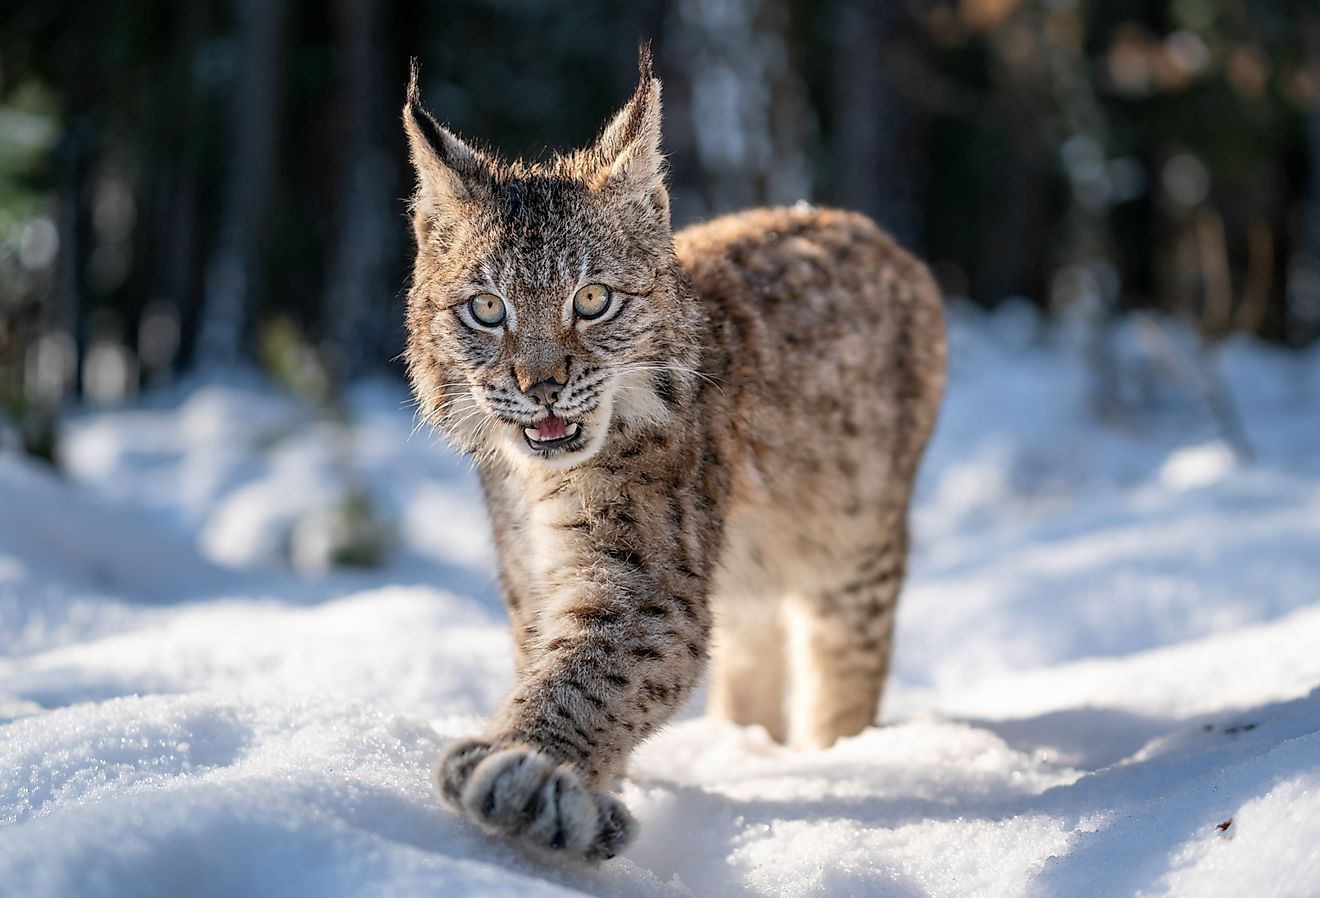 Close-up photo of lynx cub walking in the winter snowy forest with open mouth.